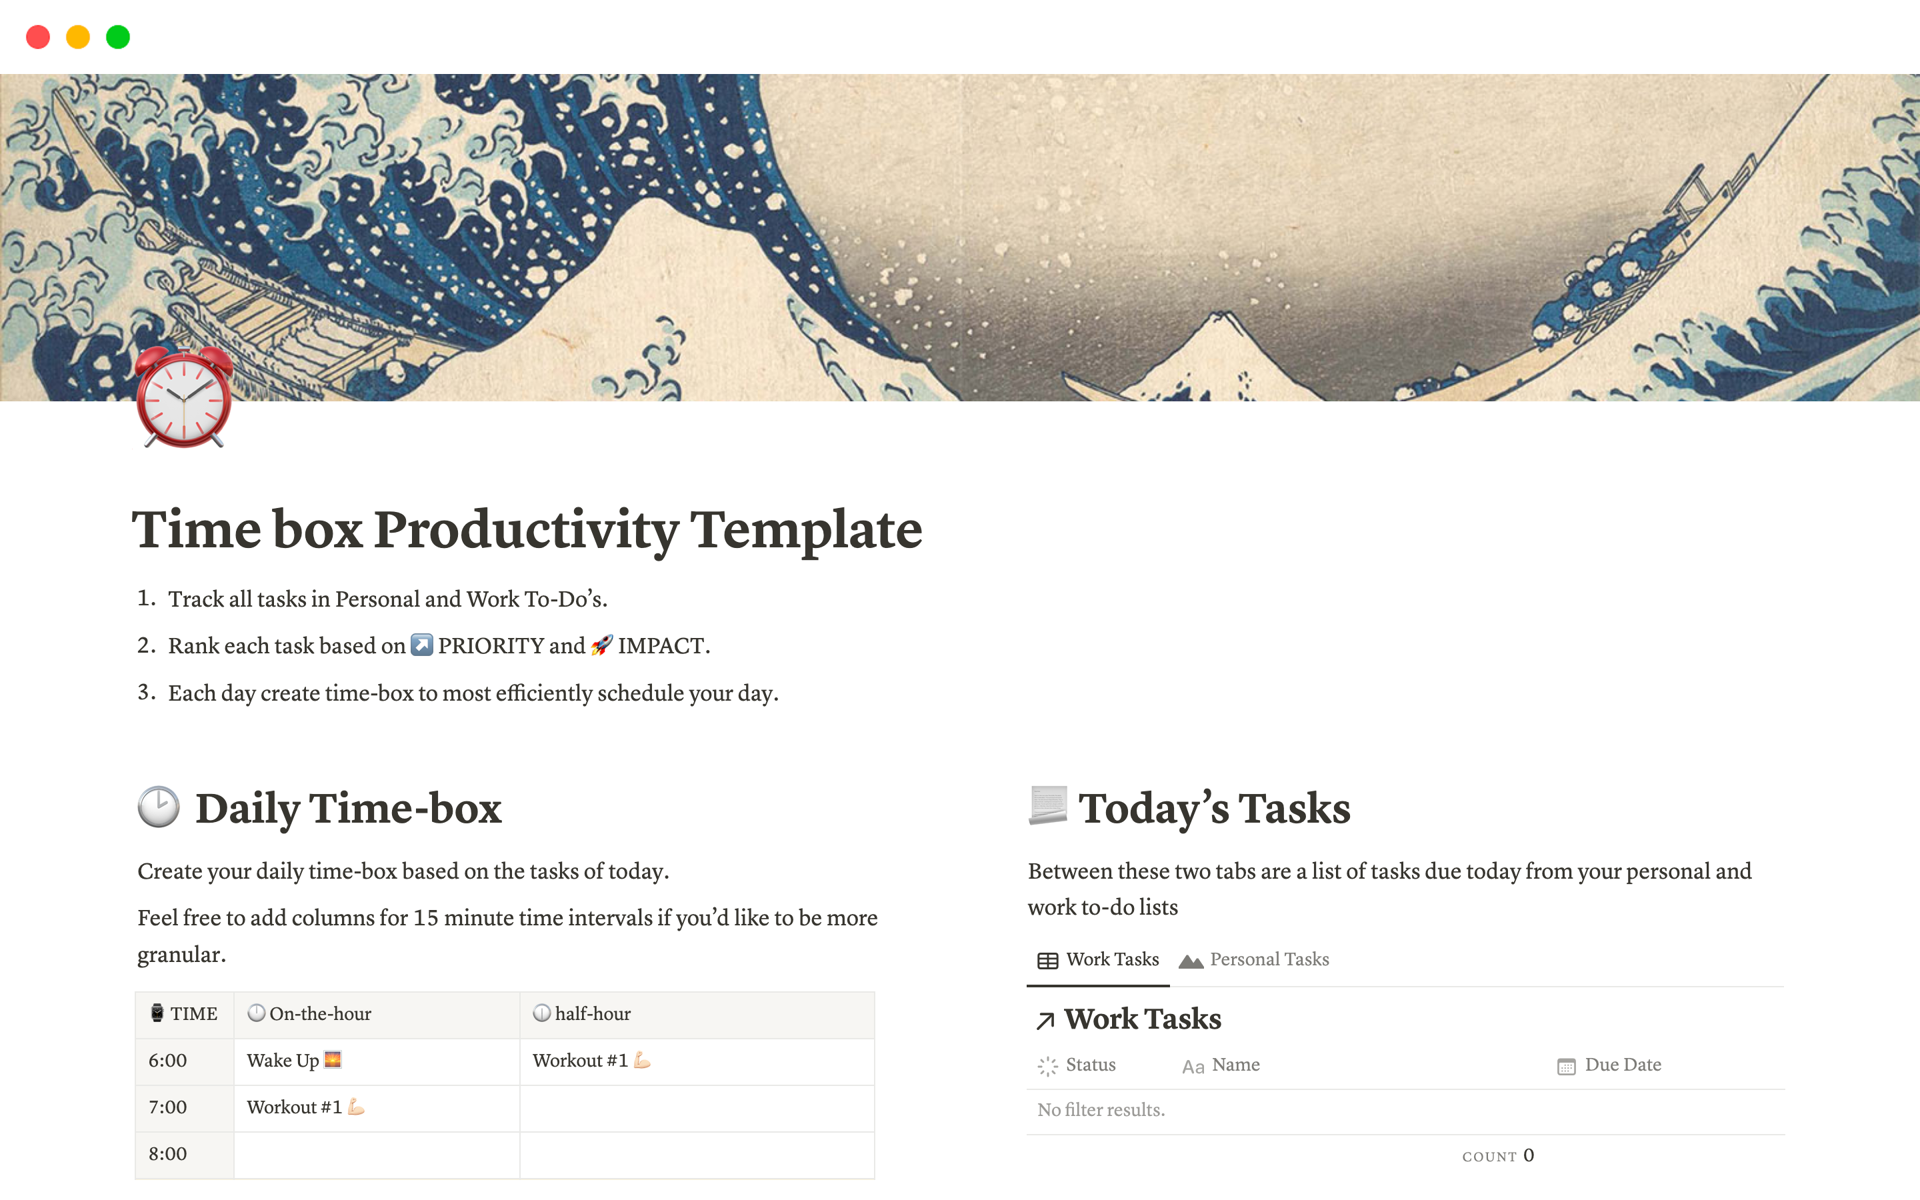 A template preview for Time box Productivity Template